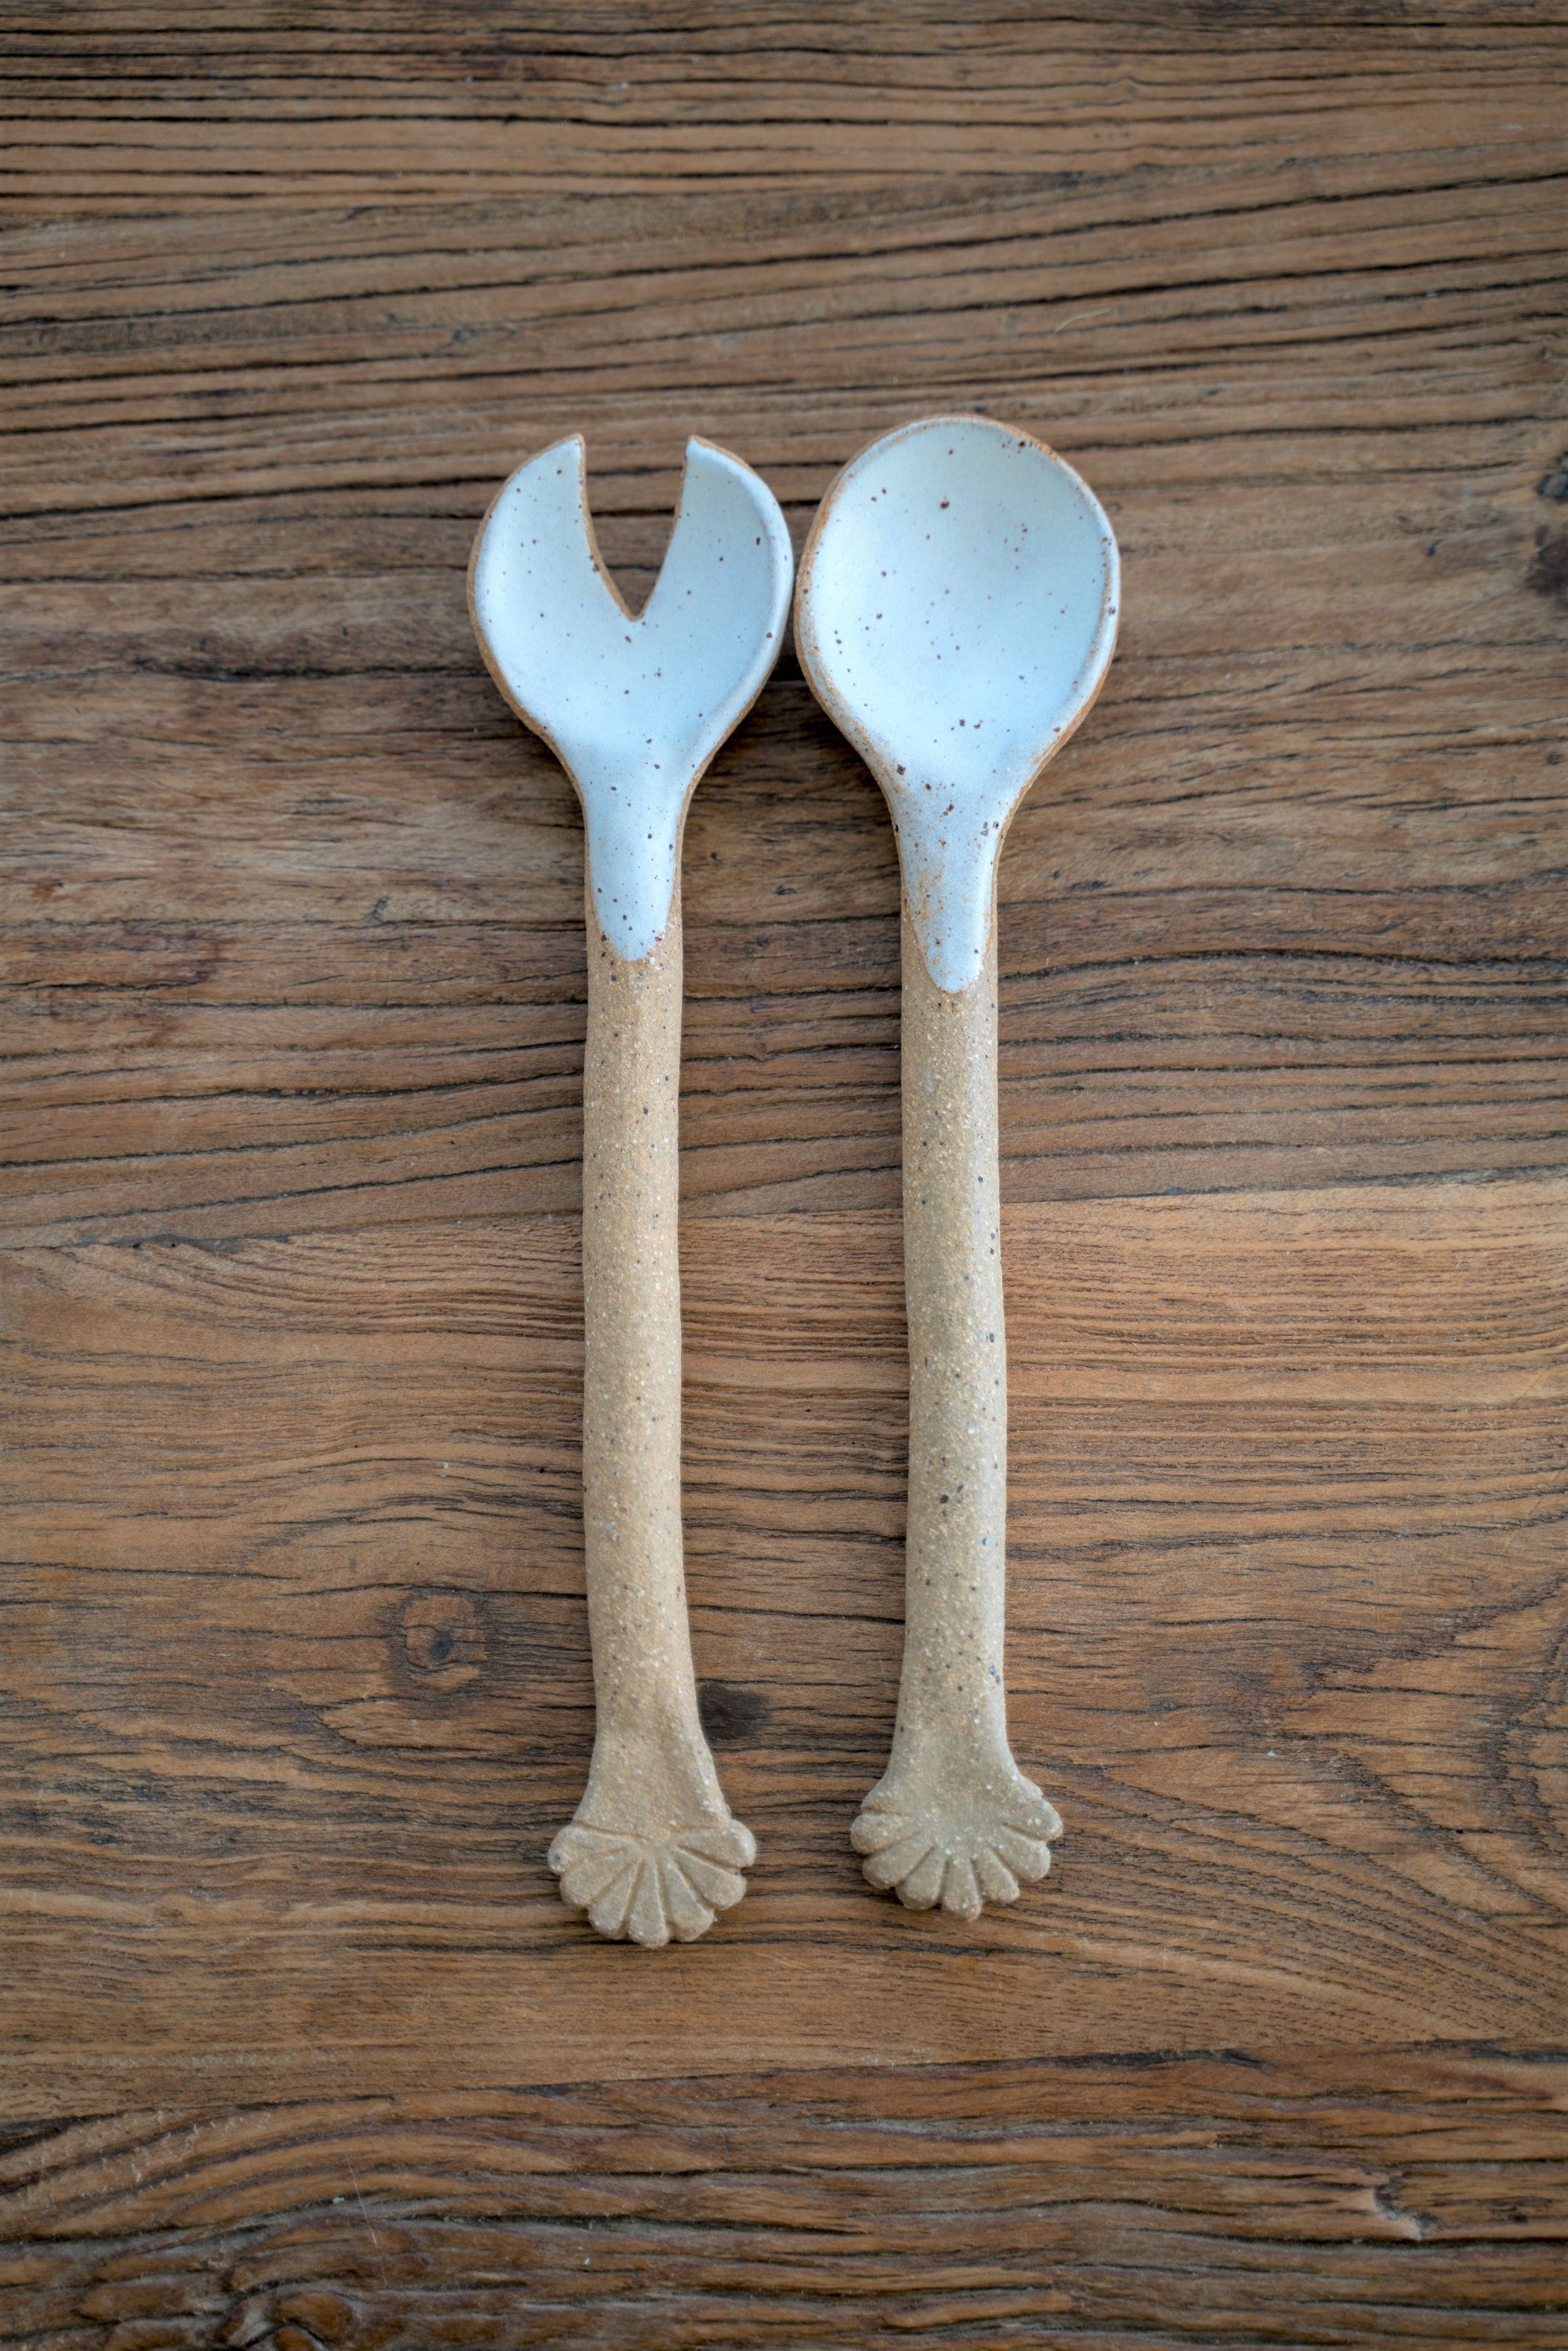 Salad servers with pretty tips - SALE